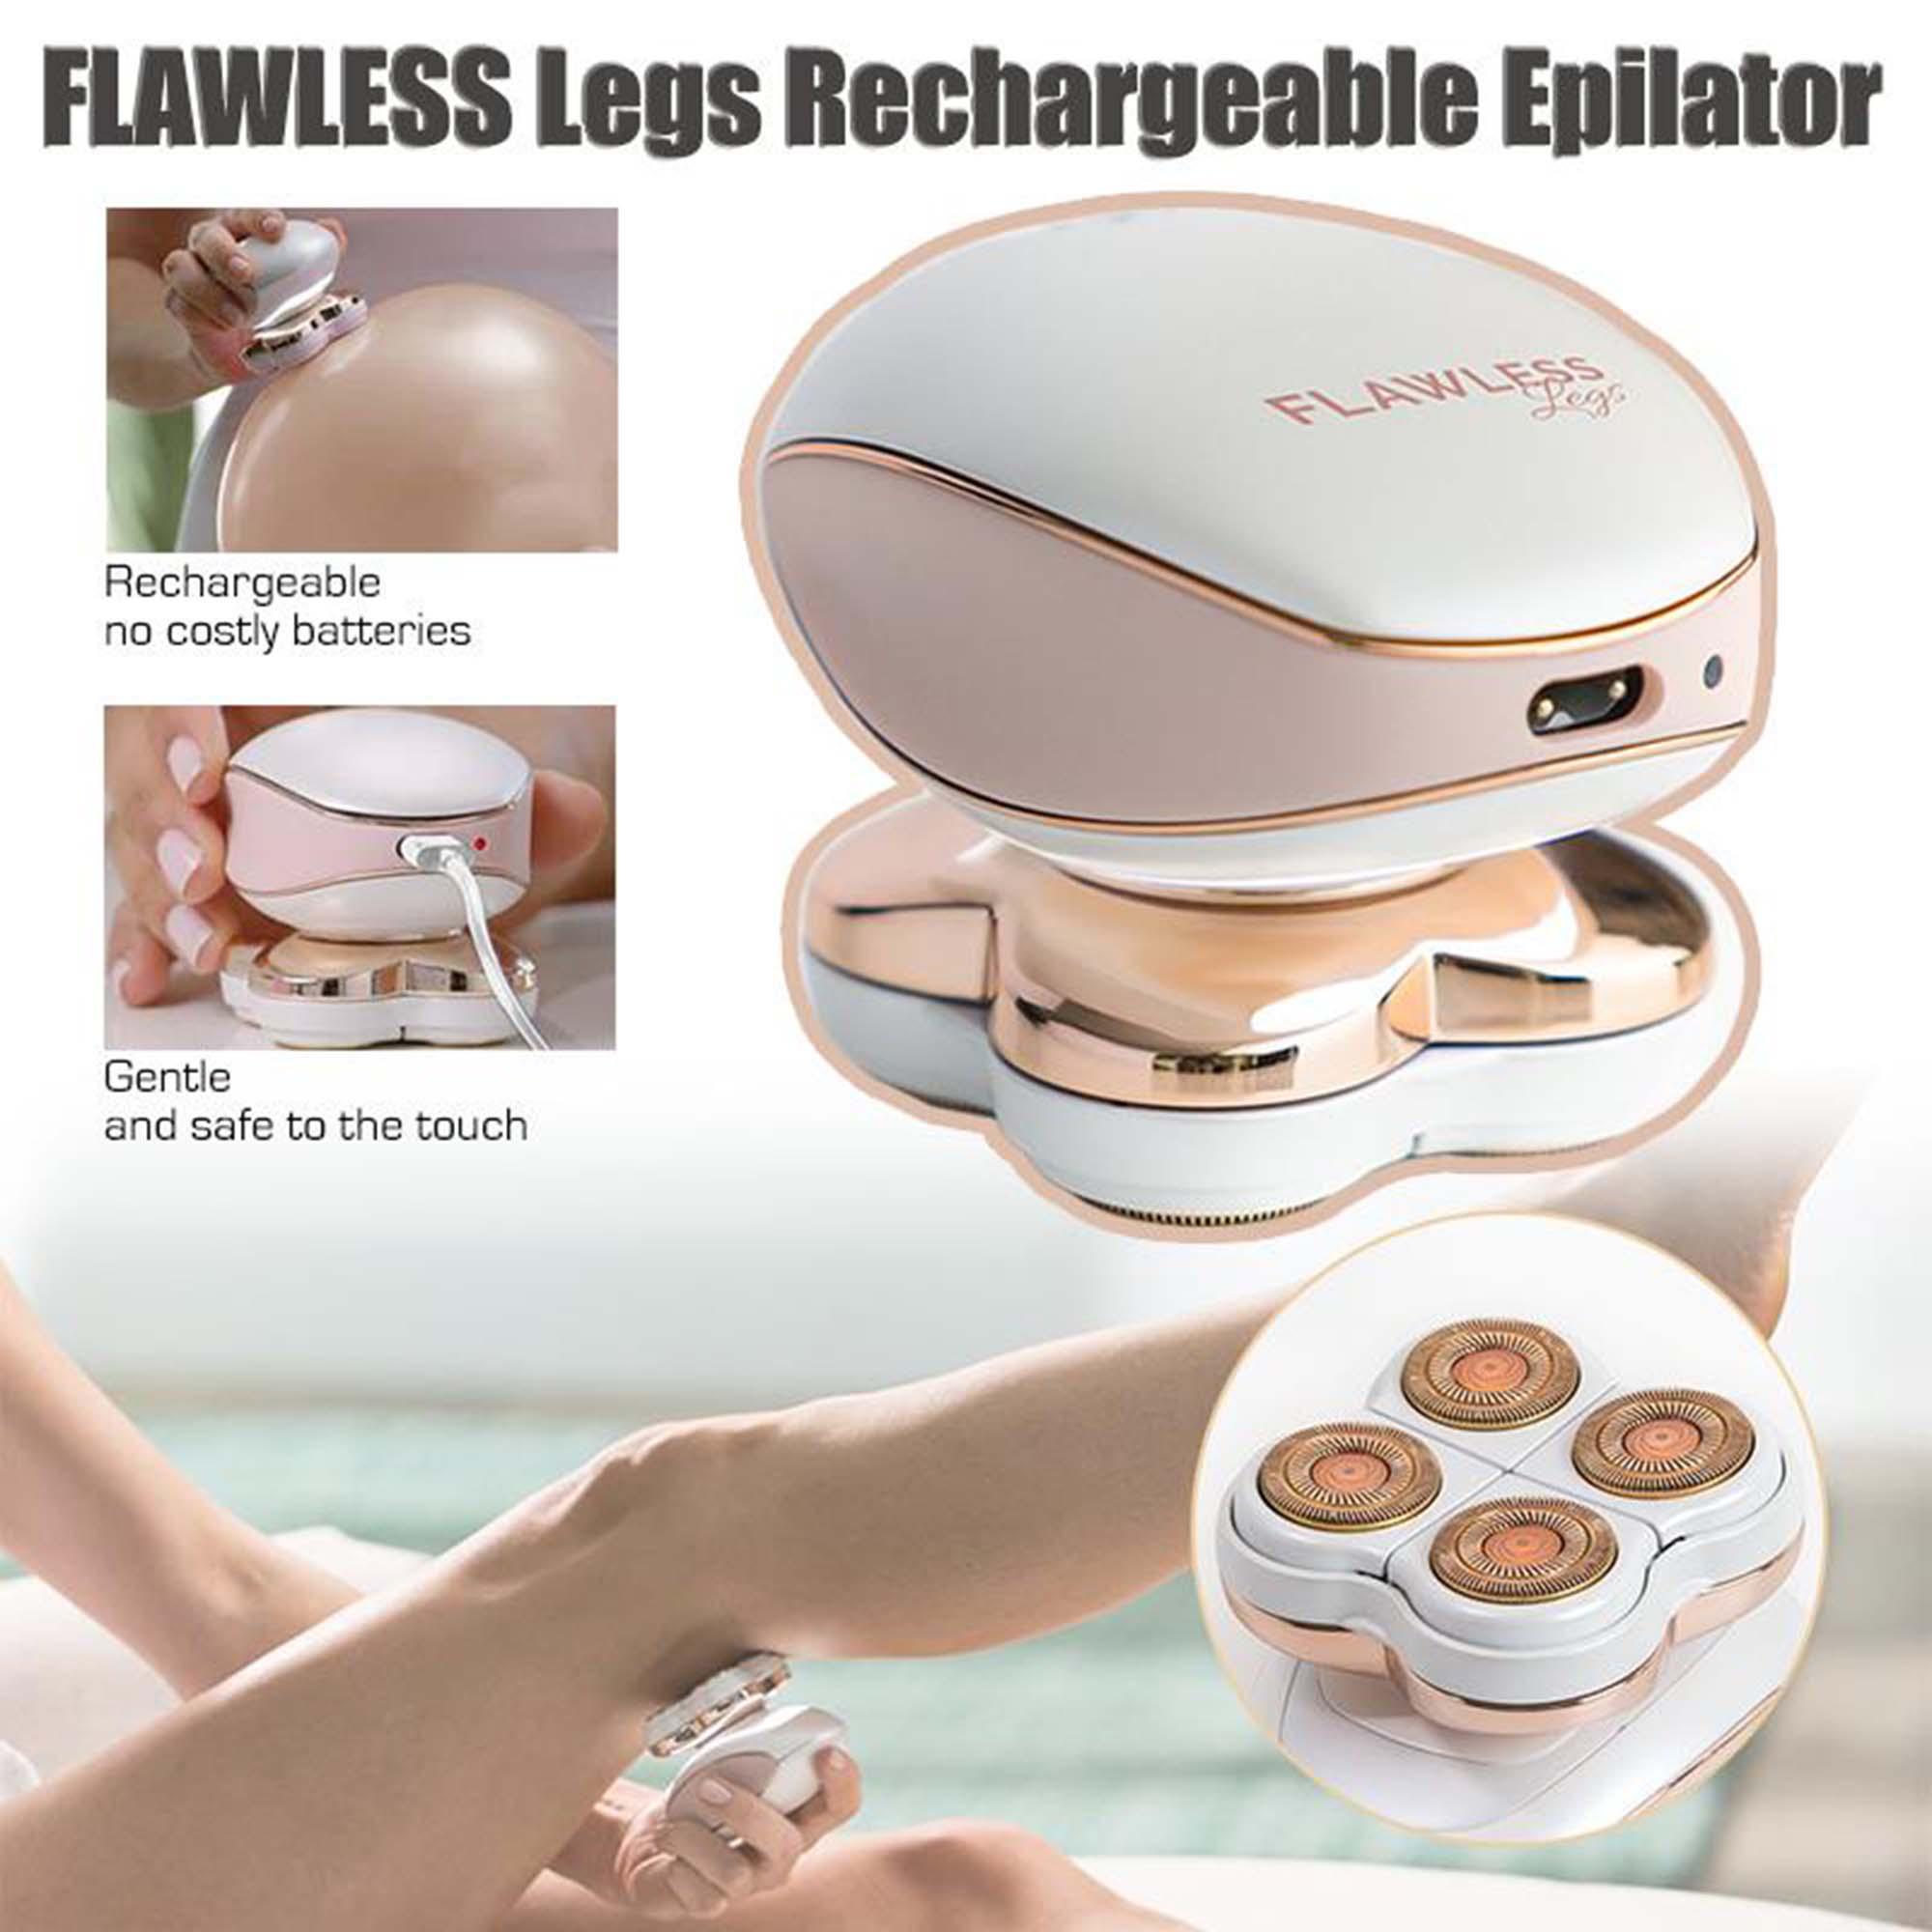 finishing touch flawless legs women's shaver